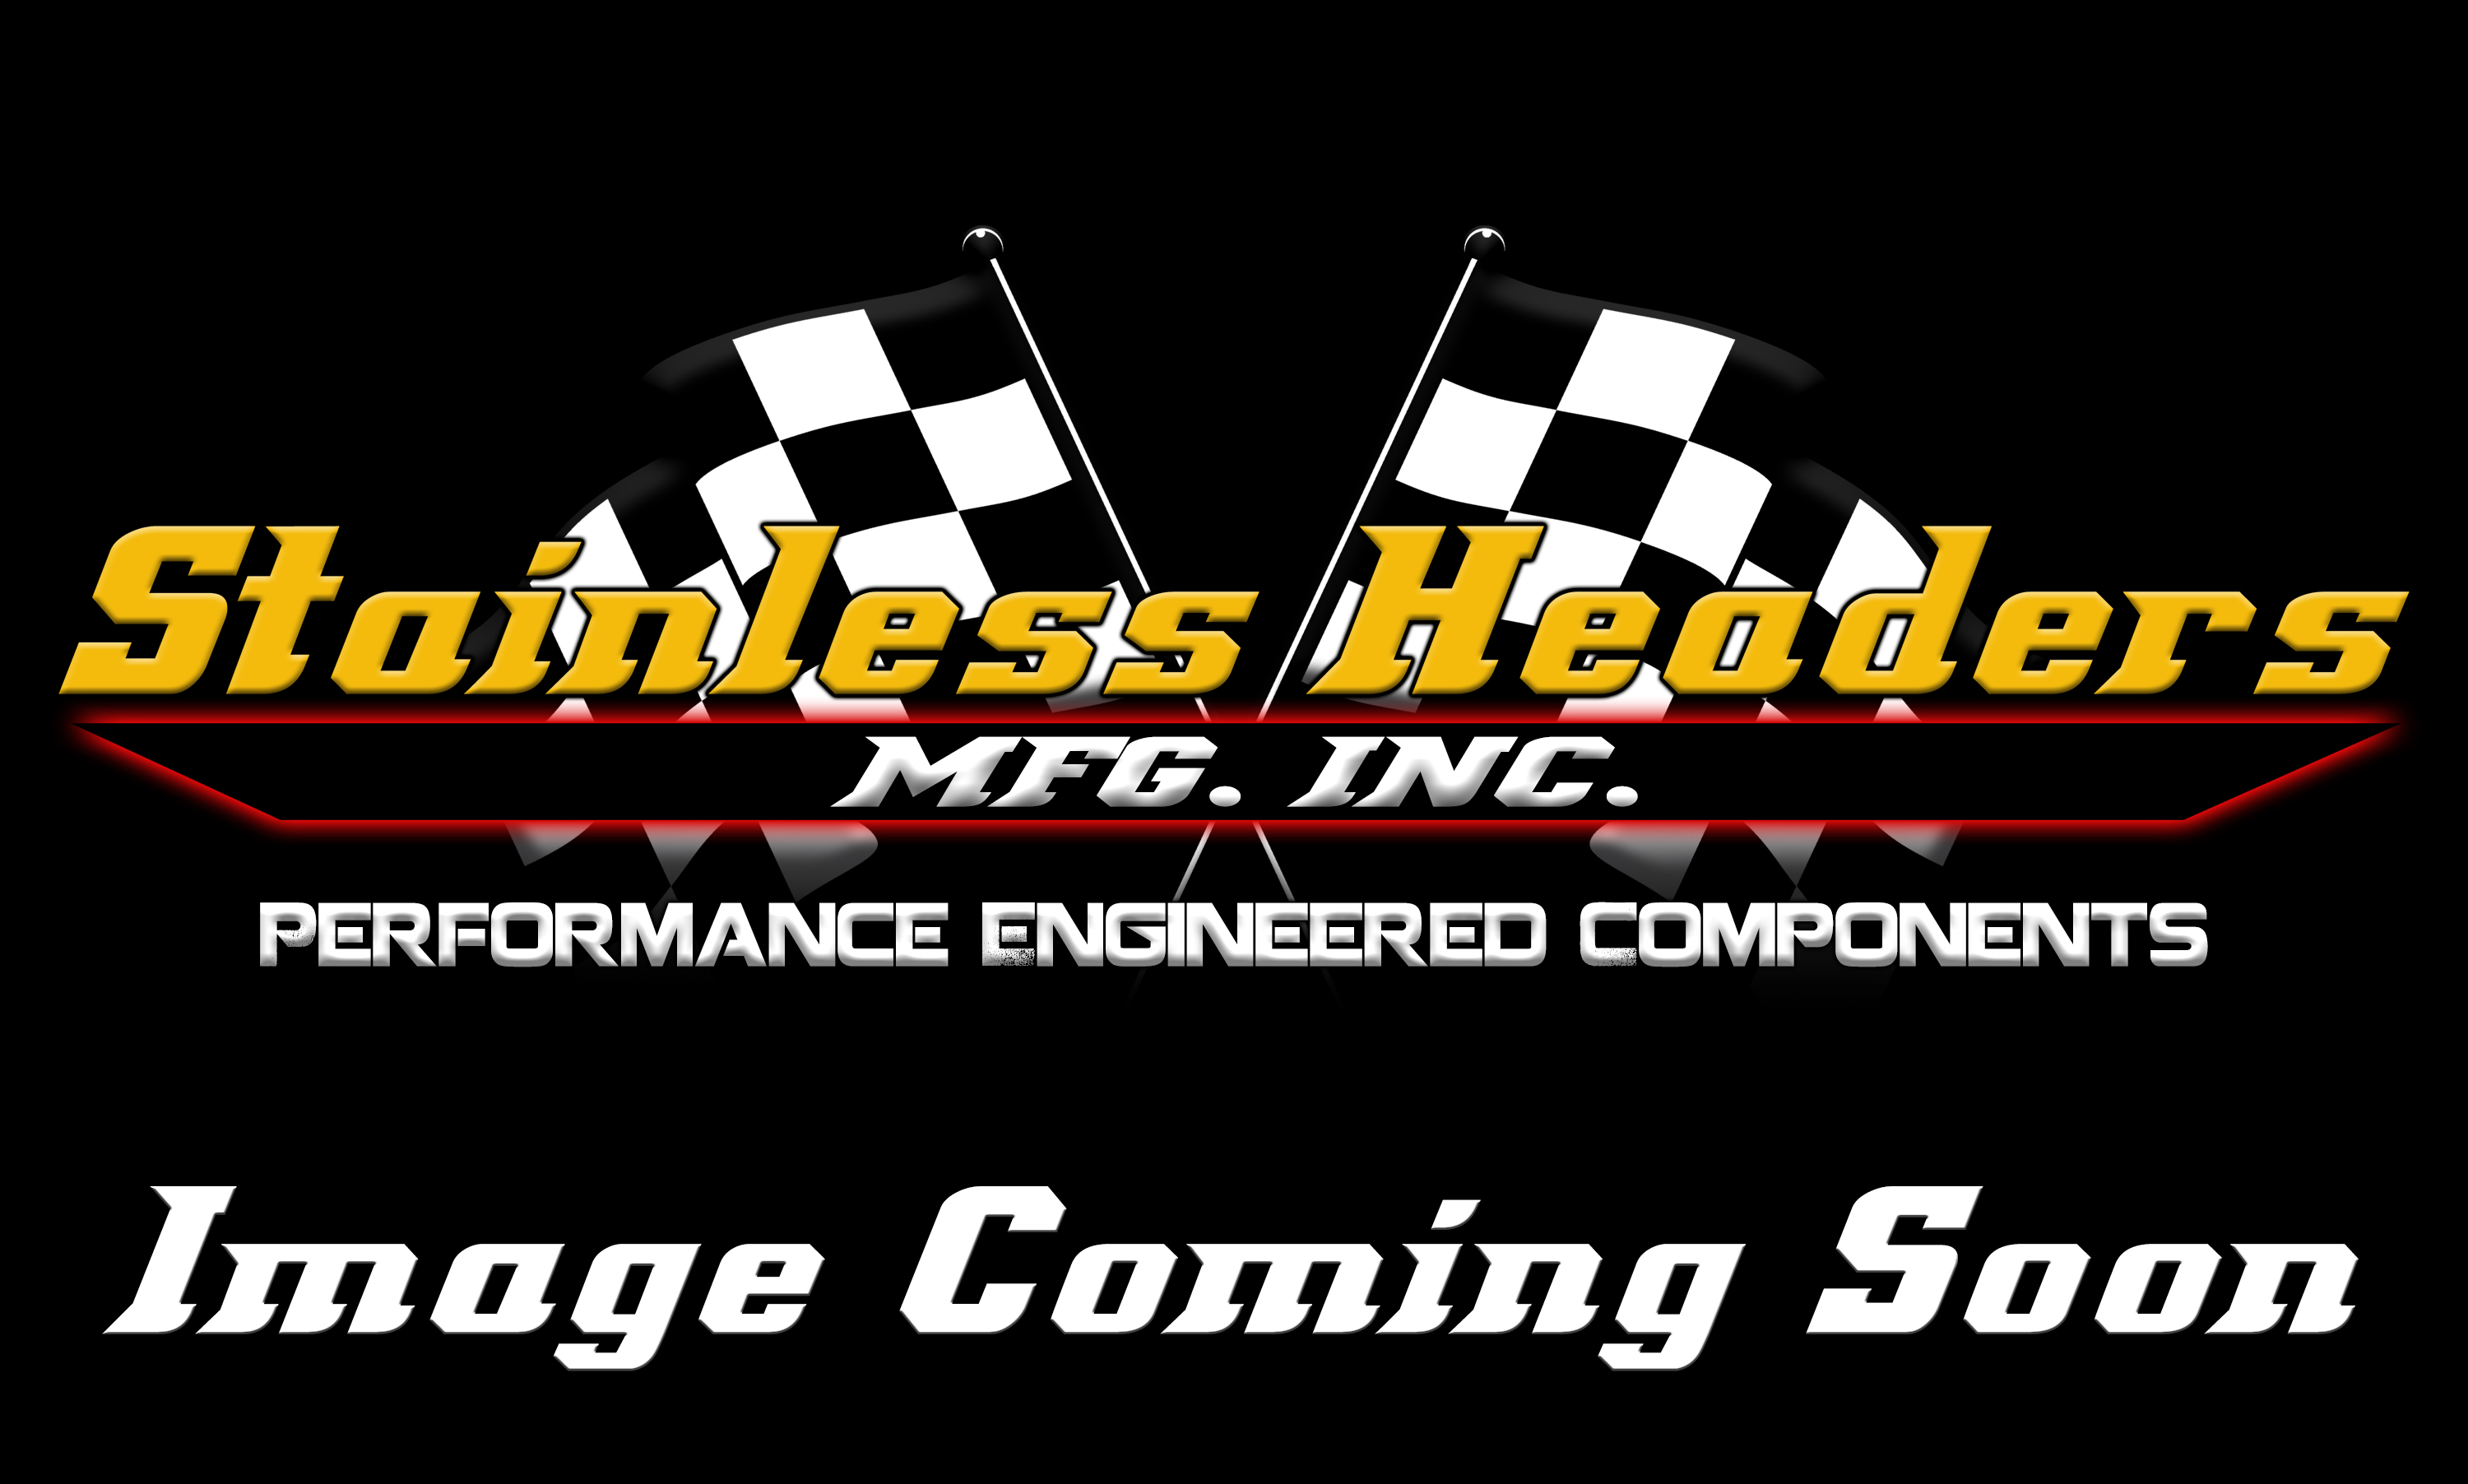 Performance Turbochargers - CompTurbo Technology Turbochargers - CompTurbo Technologies - CTR3593E-6262 360 Journal Bearing Turbocharger (800 HP)